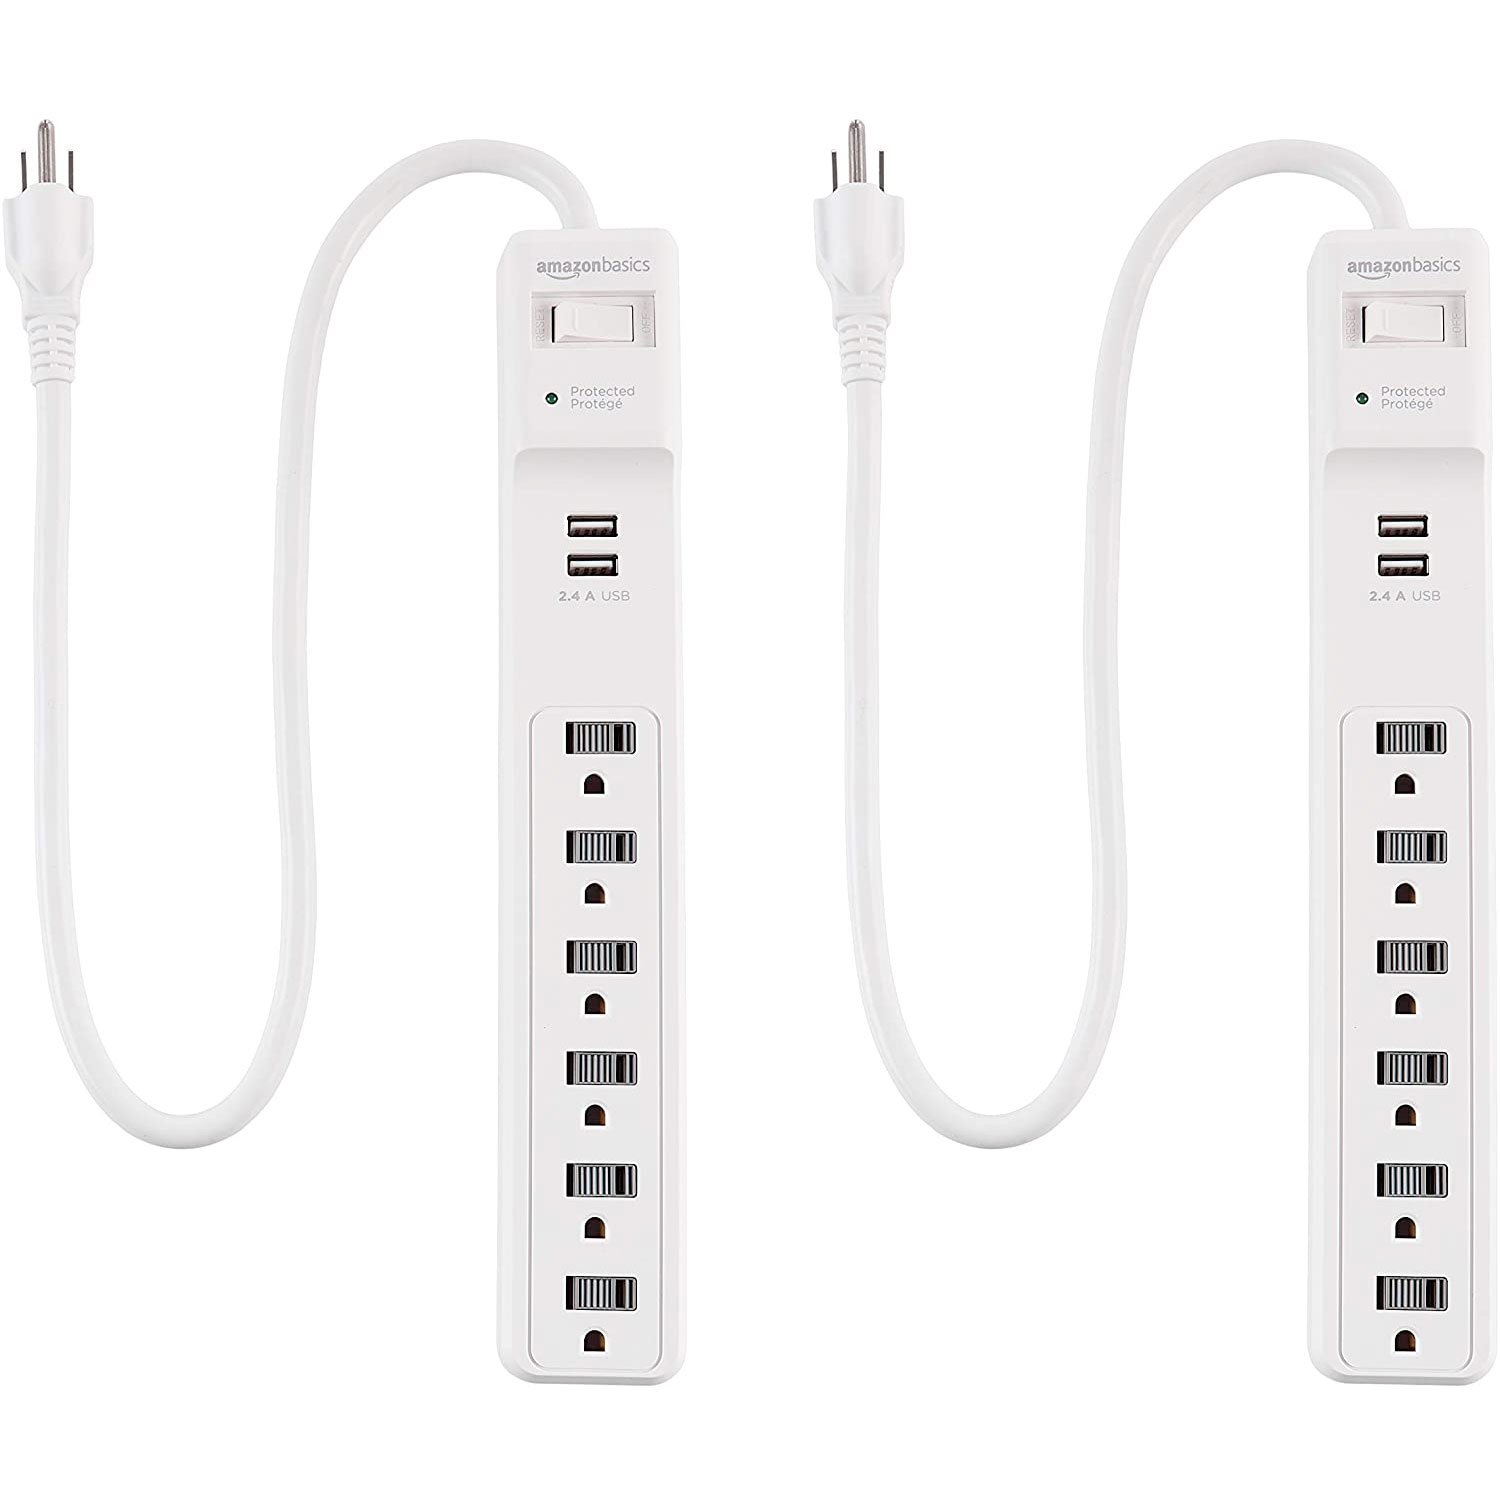 Amazon Basics 6-Outlet Surge Protector Power Strip with 2 USB Ports (2 Pack)只賣$18.98